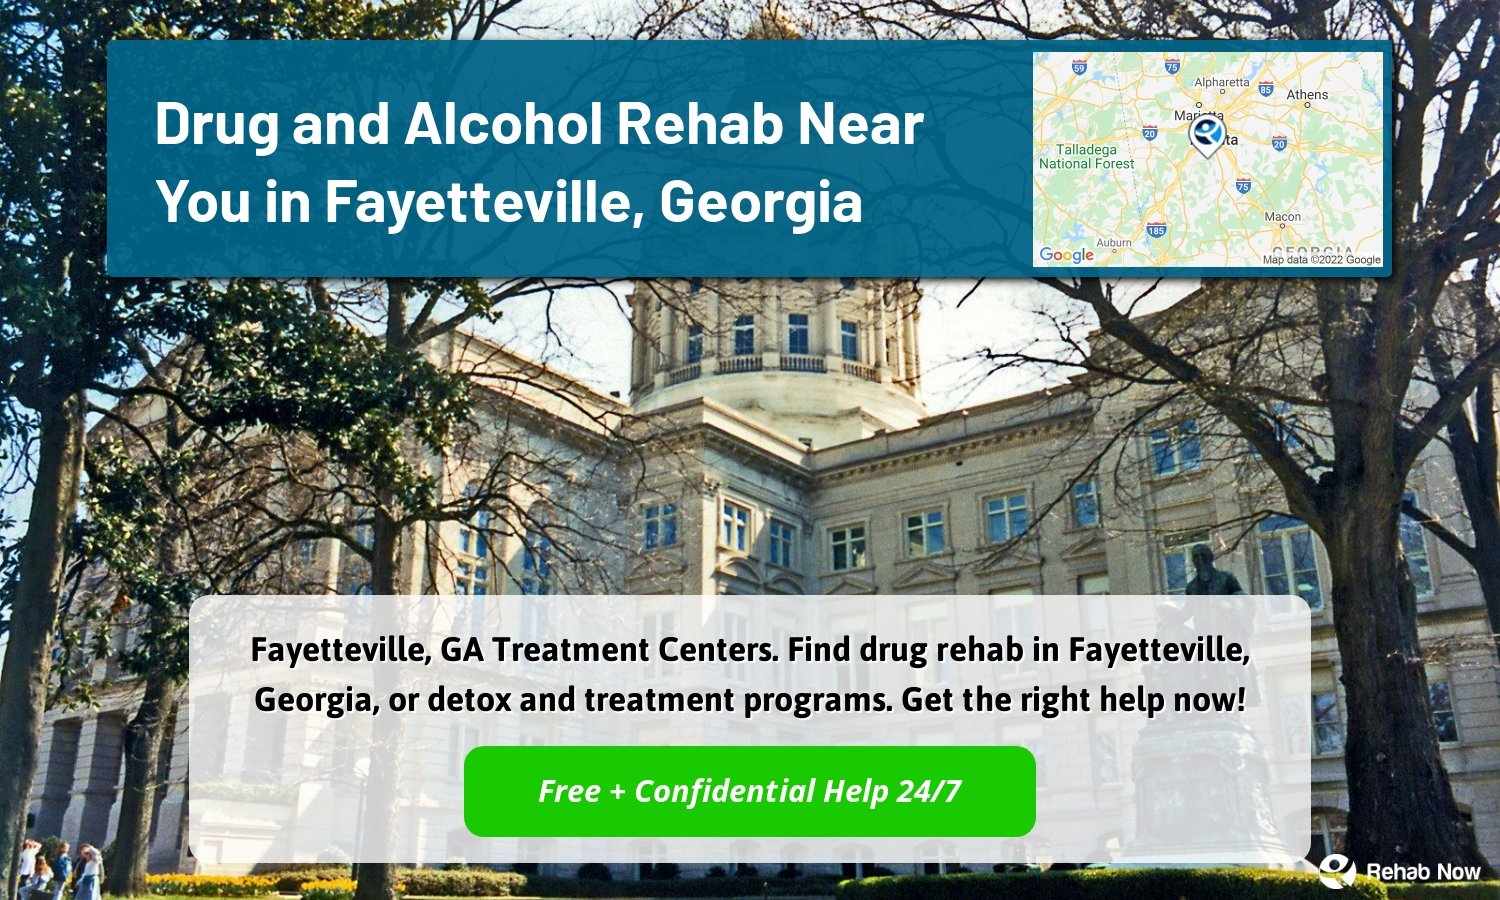 Fayetteville, GA Treatment Centers. Find drug rehab in Fayetteville, Georgia, or detox and treatment programs. Get the right help now!